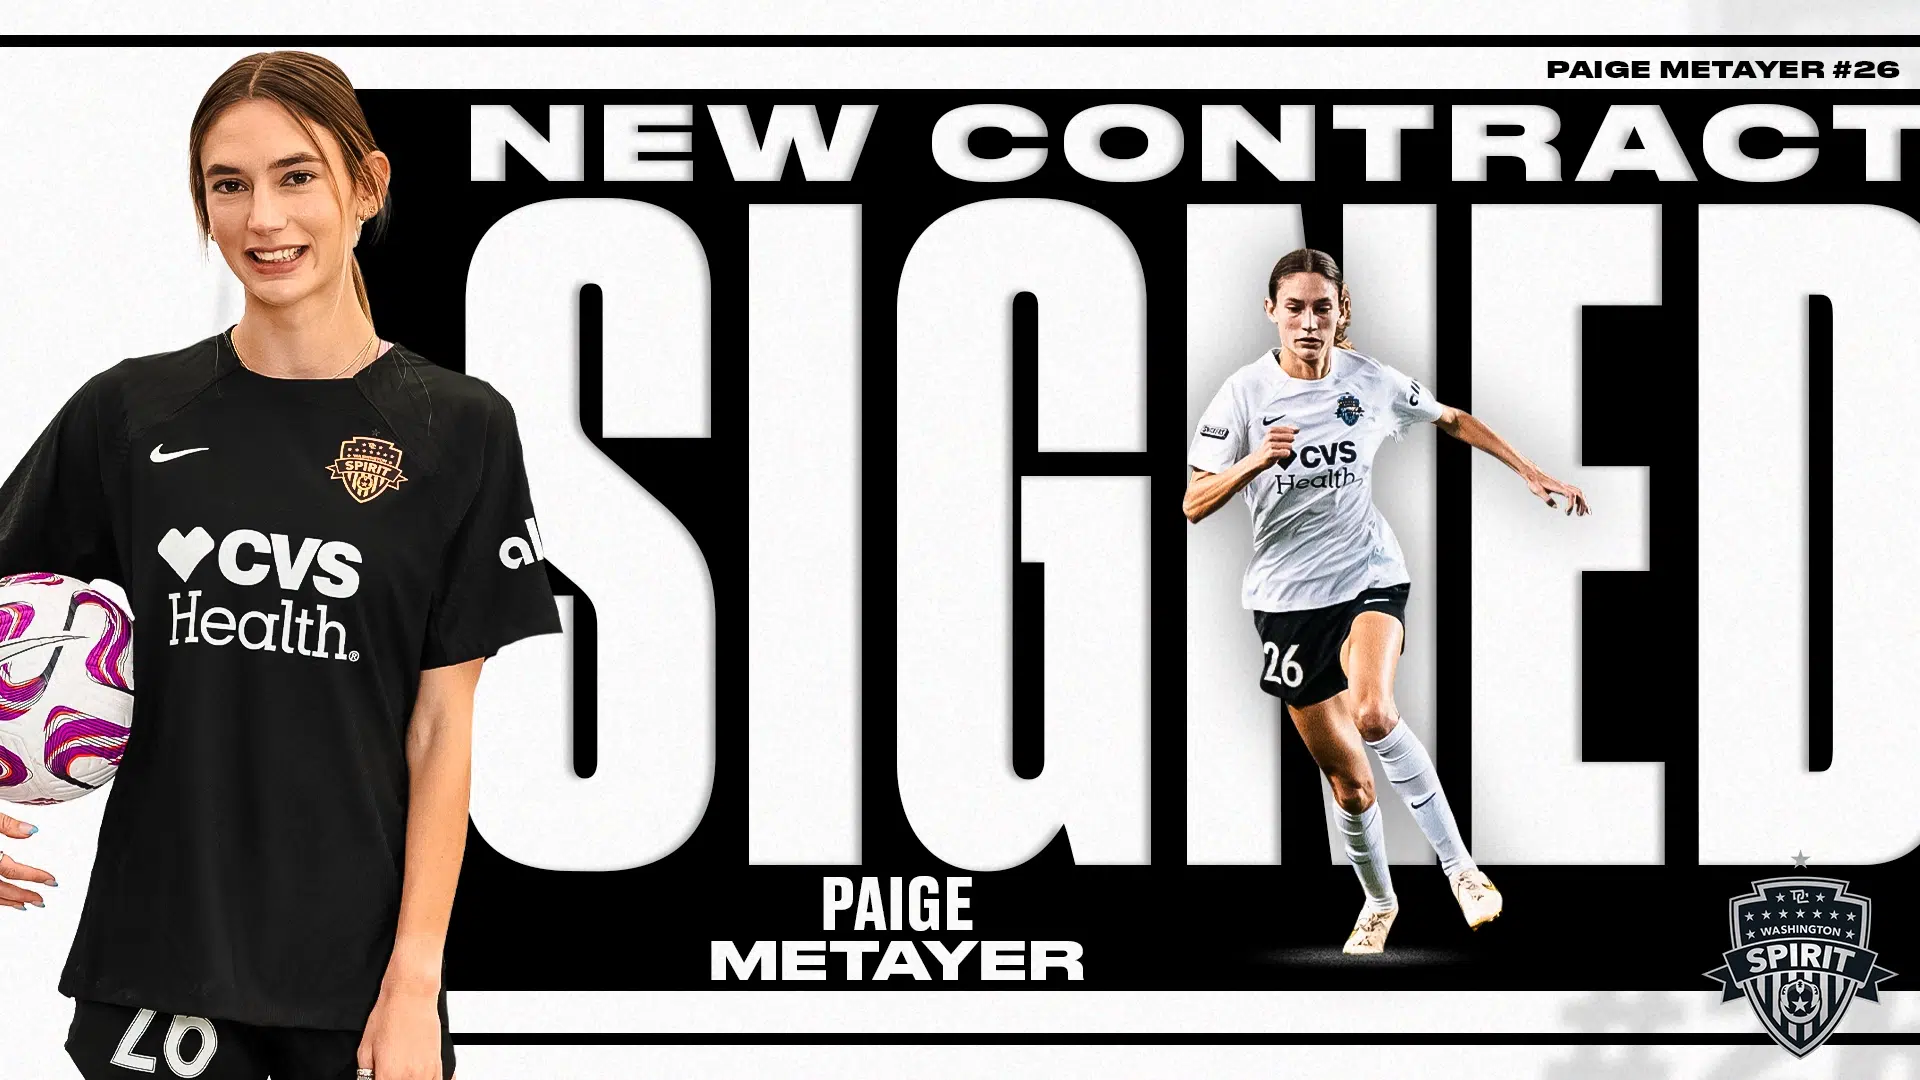 Washington Spirit Signs Midfielder Paige Metayer to New Contract Featured Image